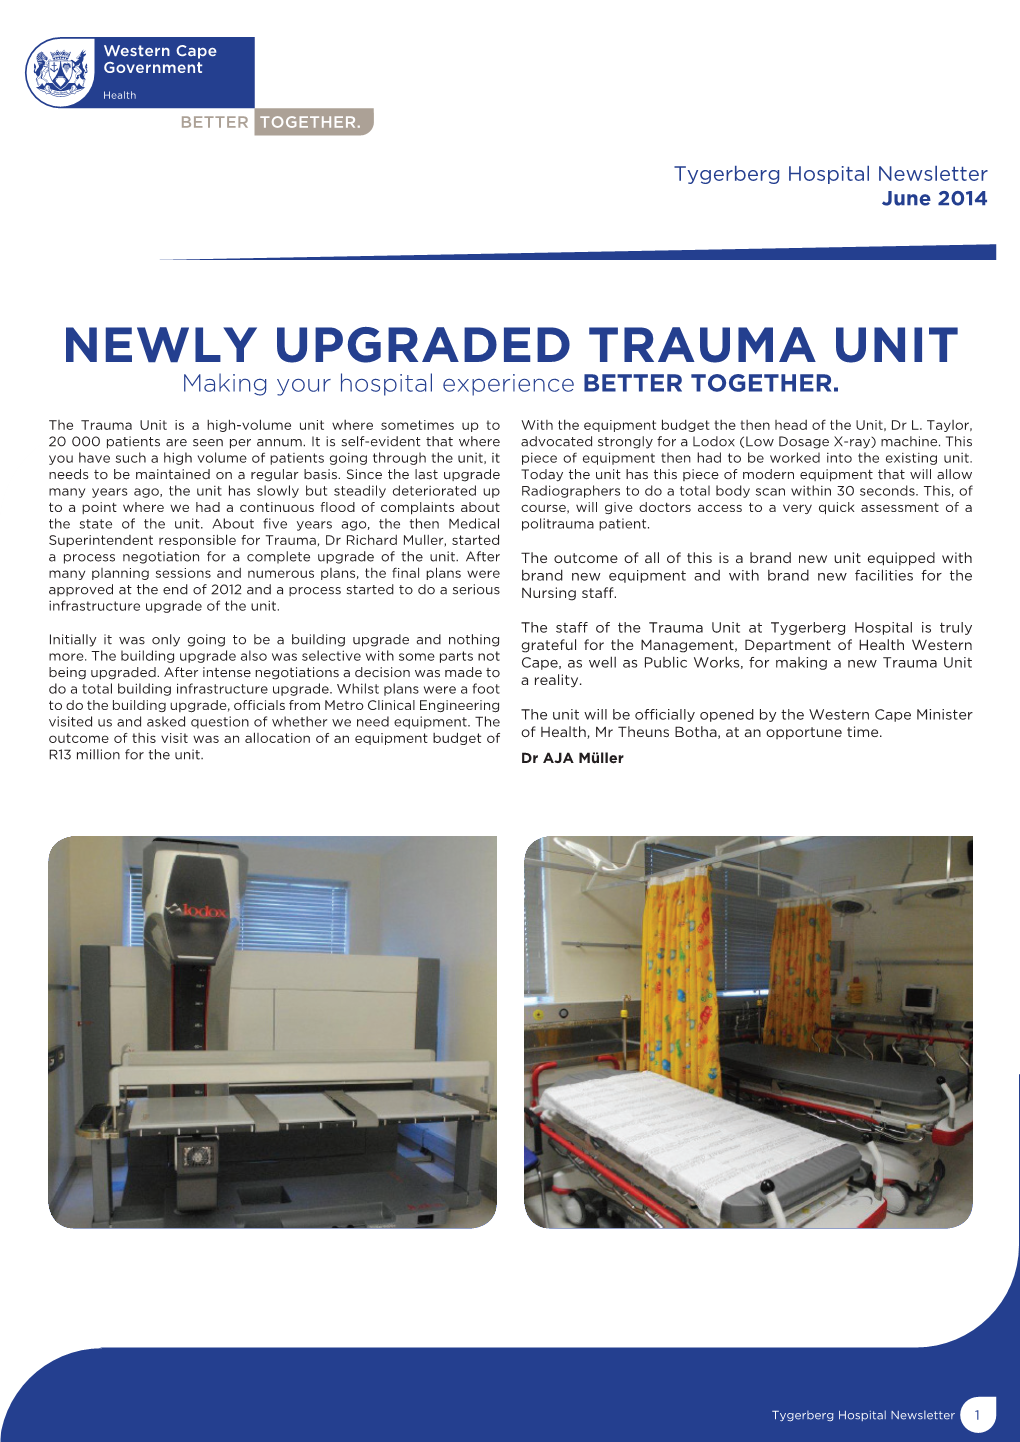 Newly Upgraded Trauma Unit Making Your Hospital Experience BETTER TOGETHER